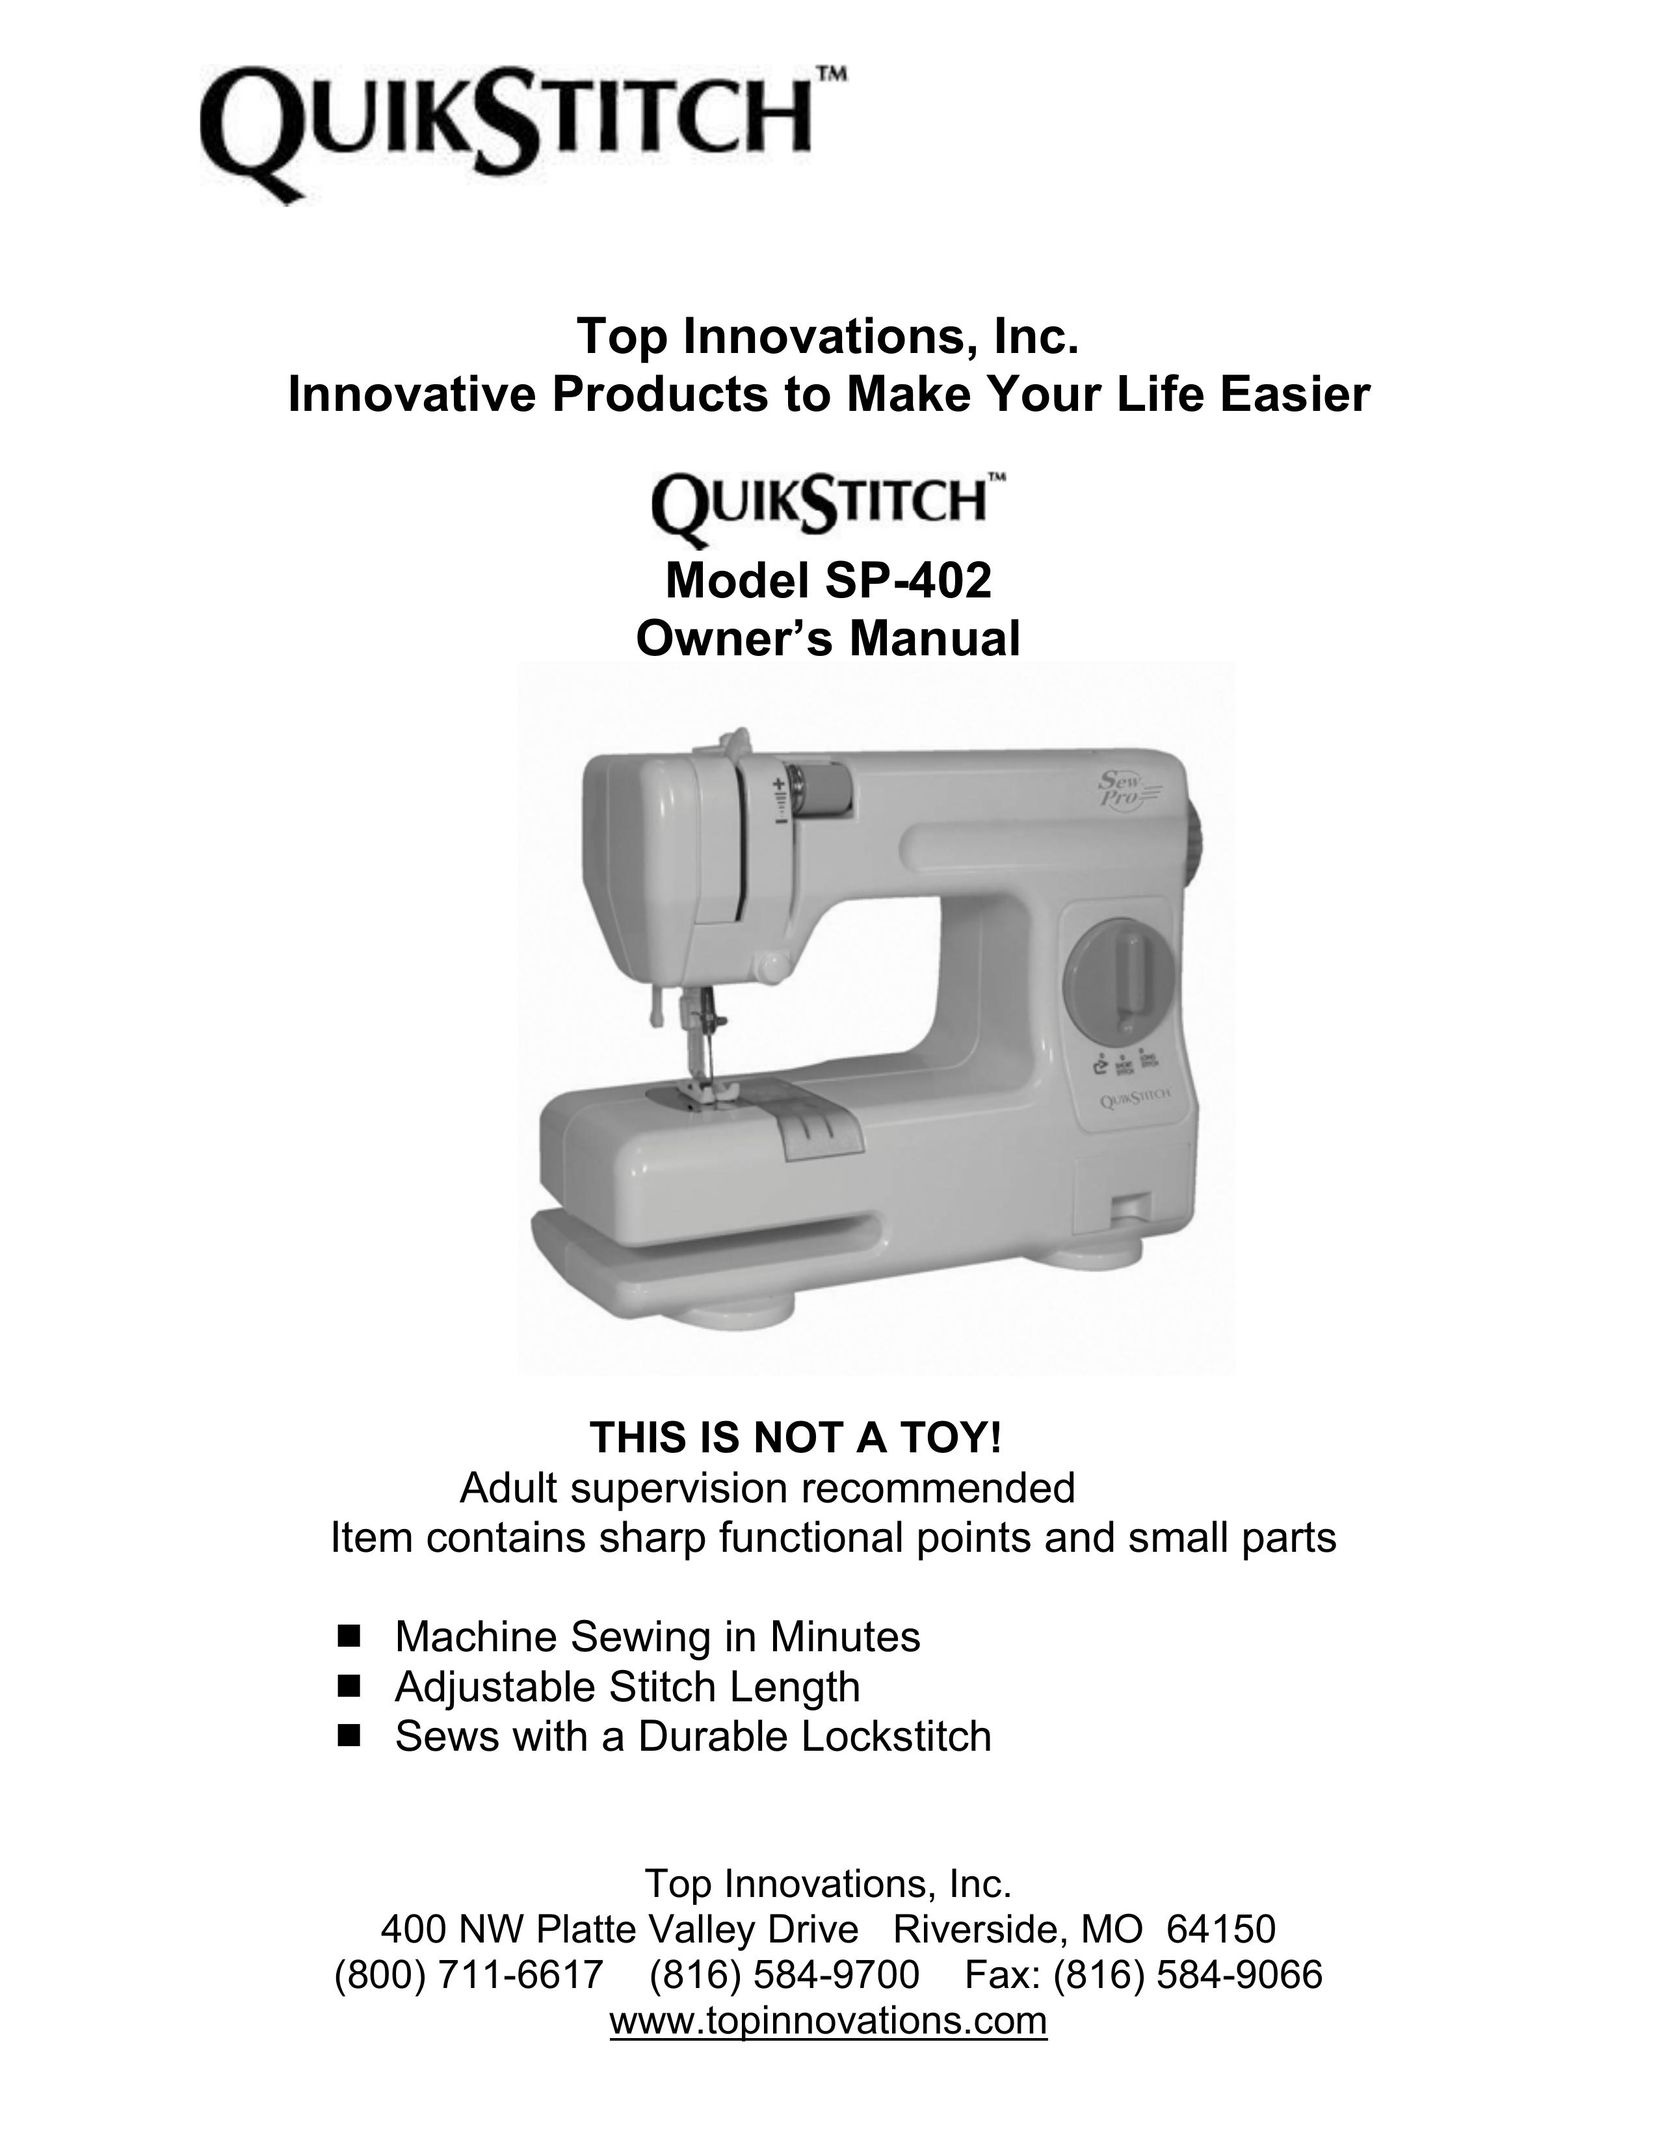 Top Innovations SP-402 Sewing Machine User Manual